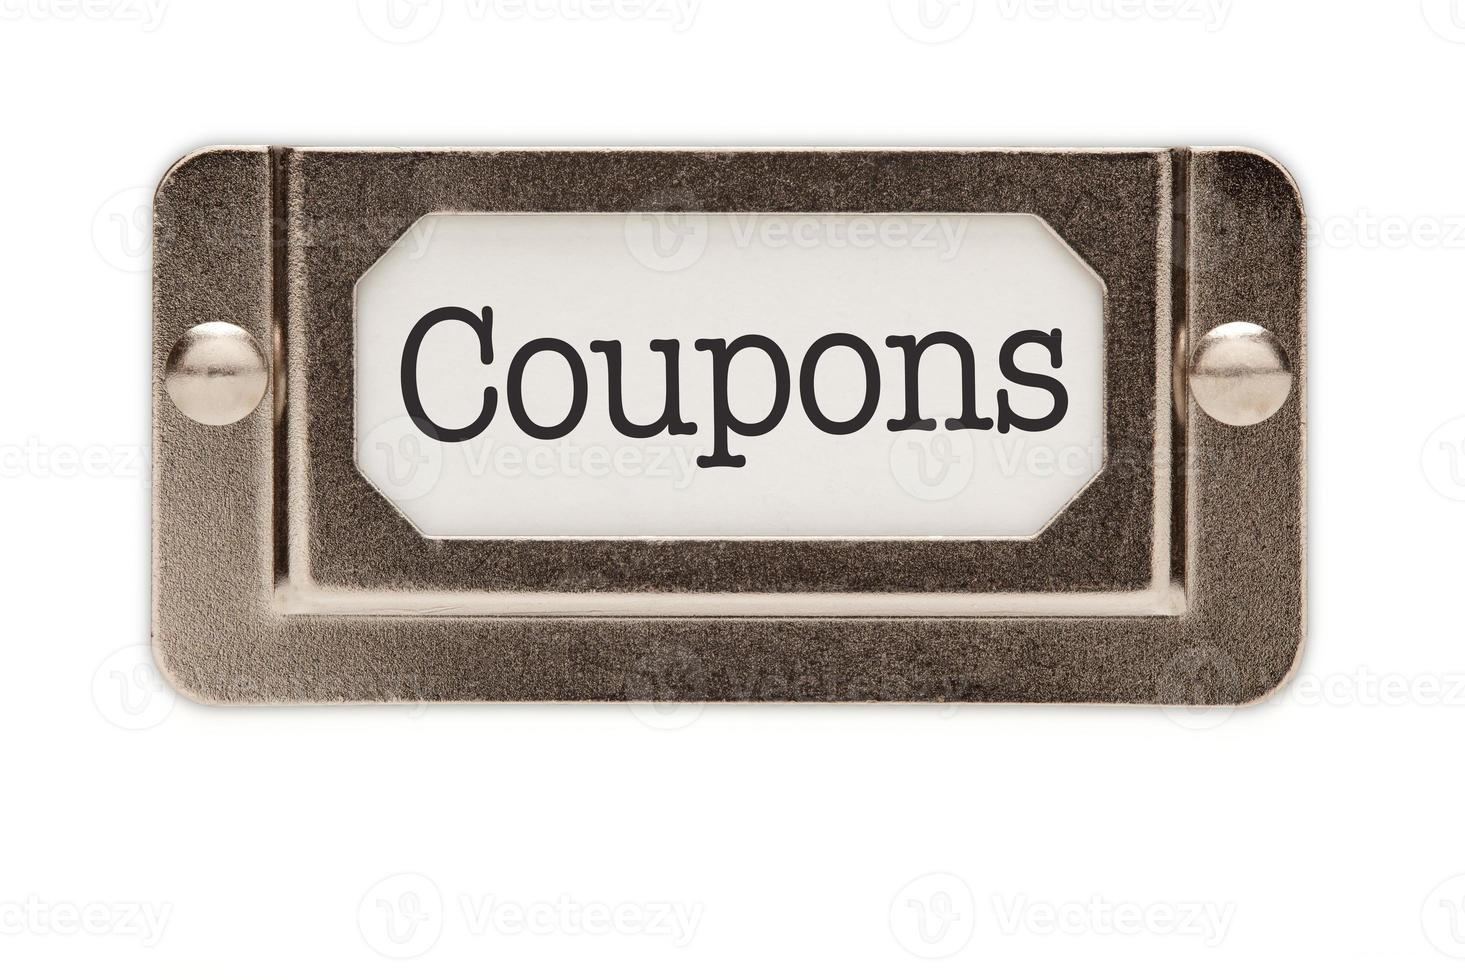 Coupons File Drawer Label photo